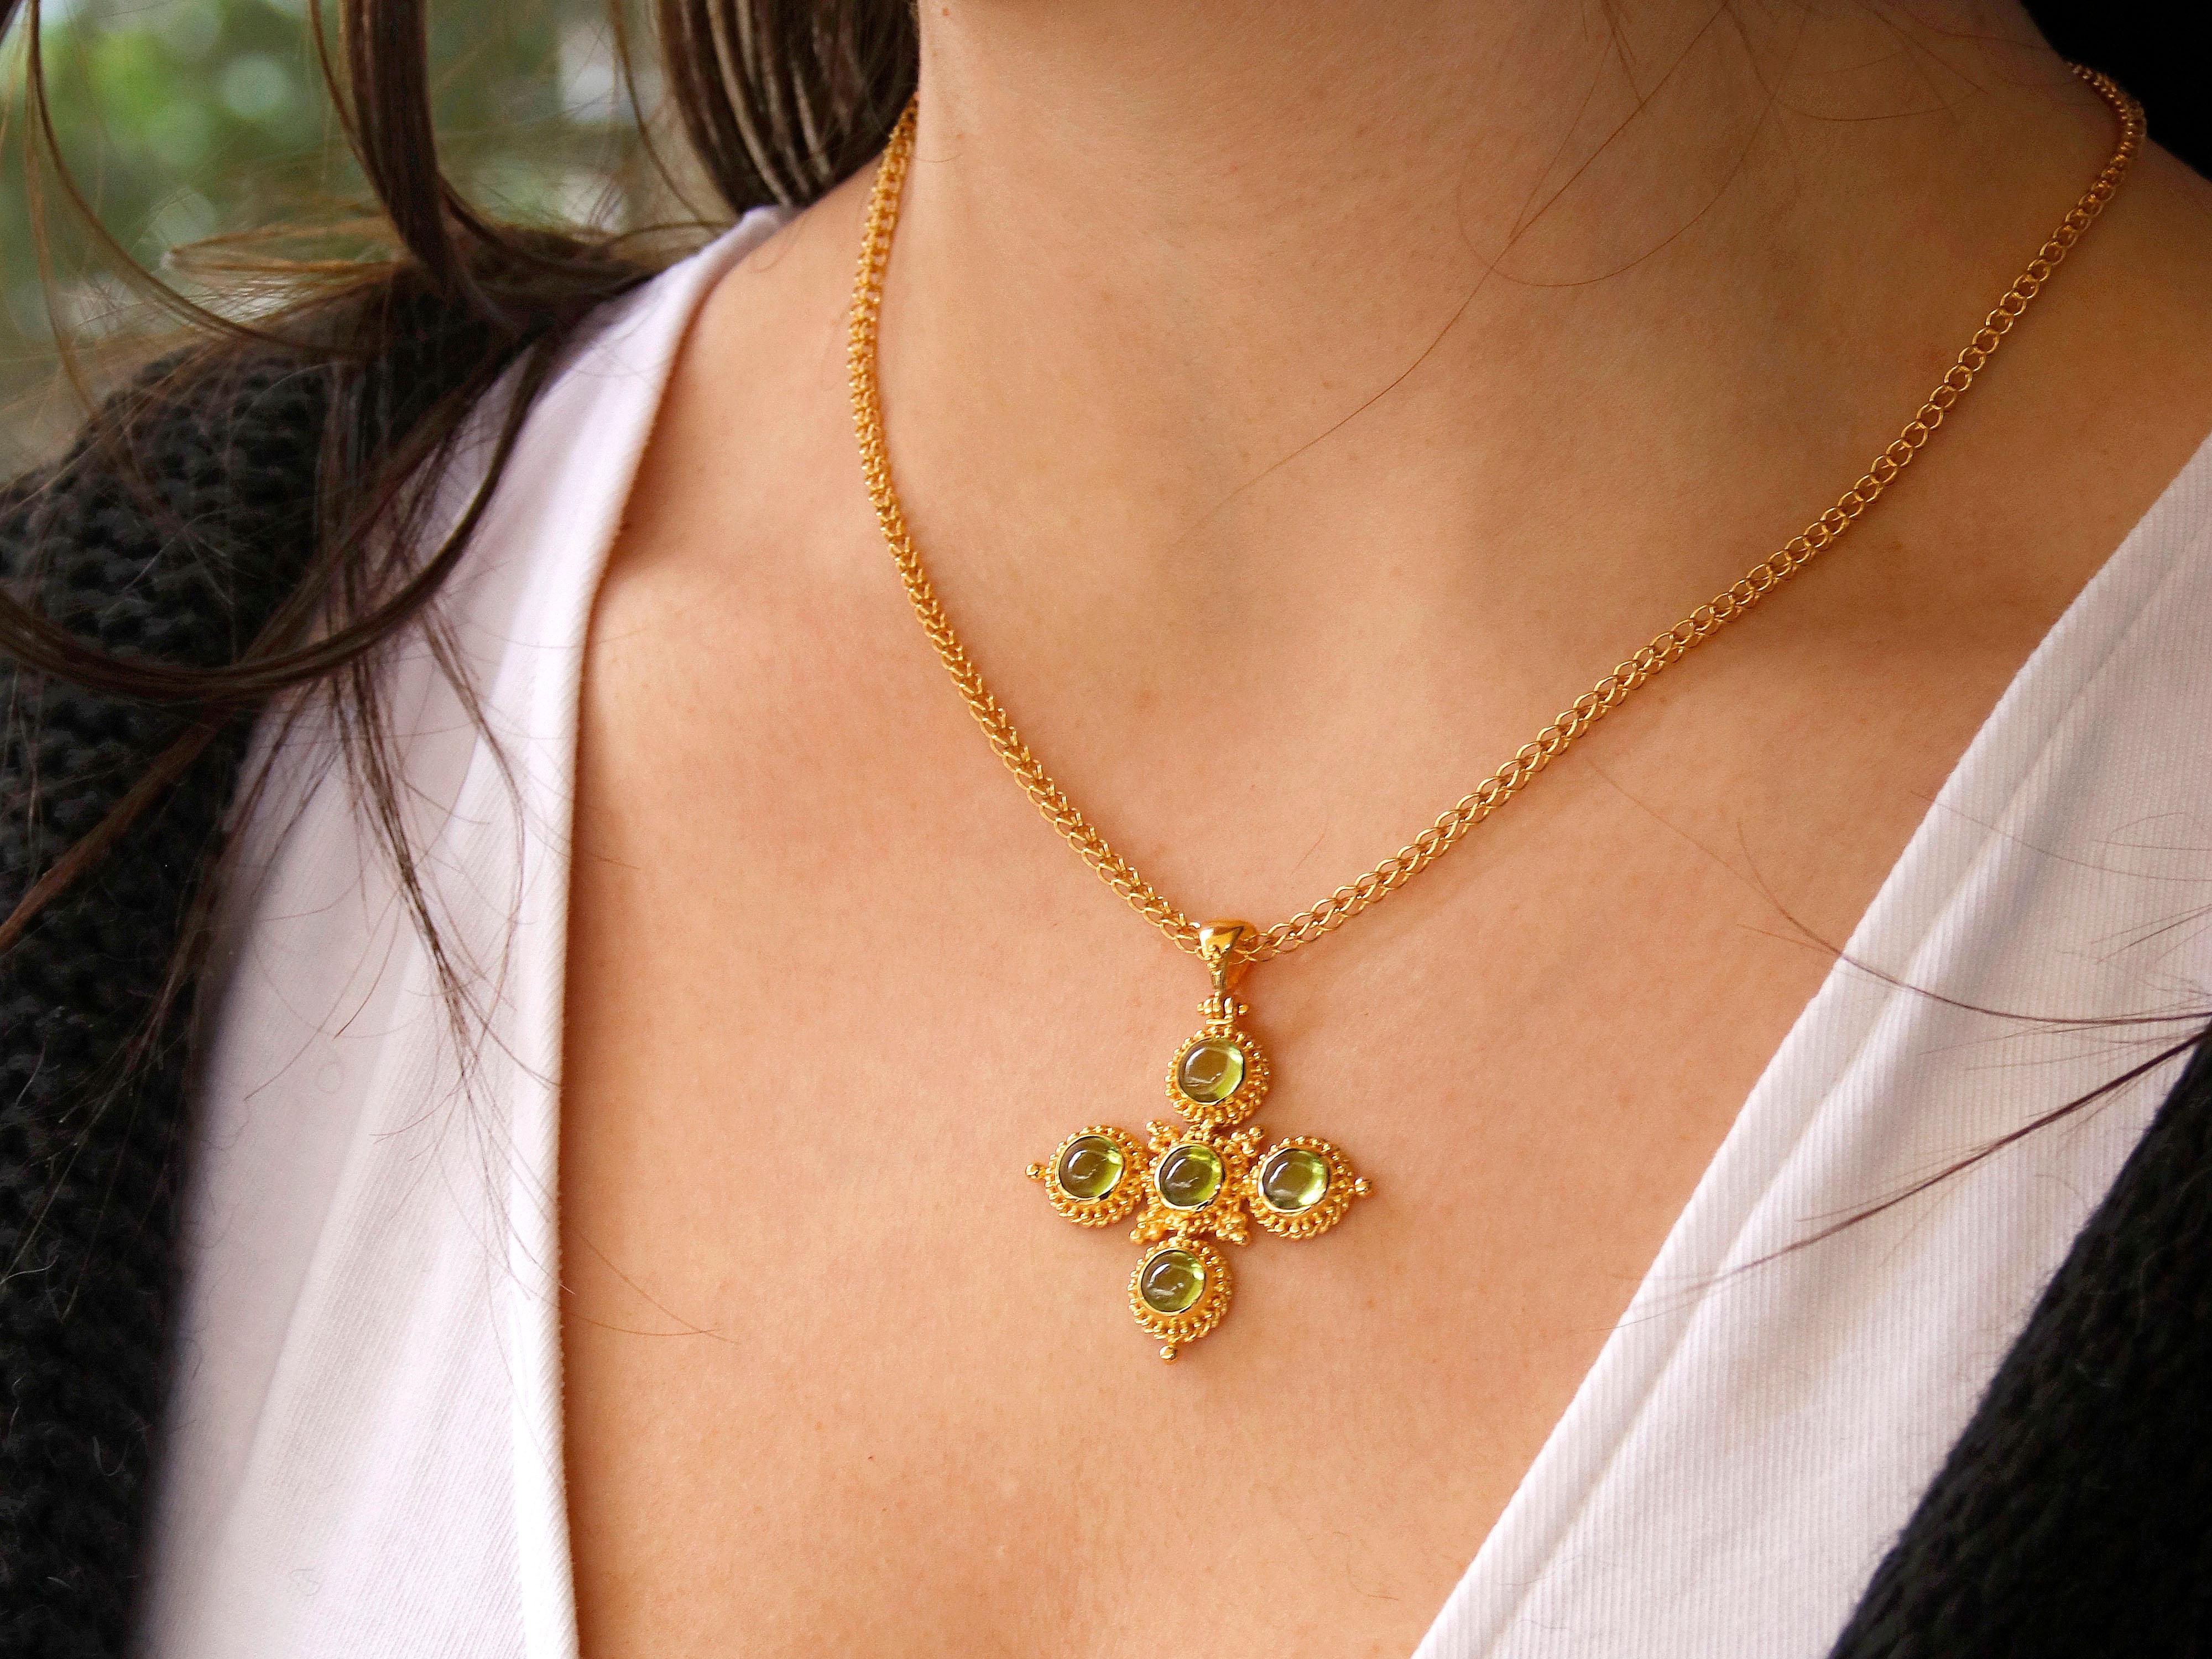 A stunning piece of jewelry, this 18k gold granulated cross features beautiful peridot gemstones and filigree work. The cross pendant is meticulously crafted with granulation technique, which involve placing tiny gold granules onto the surface to